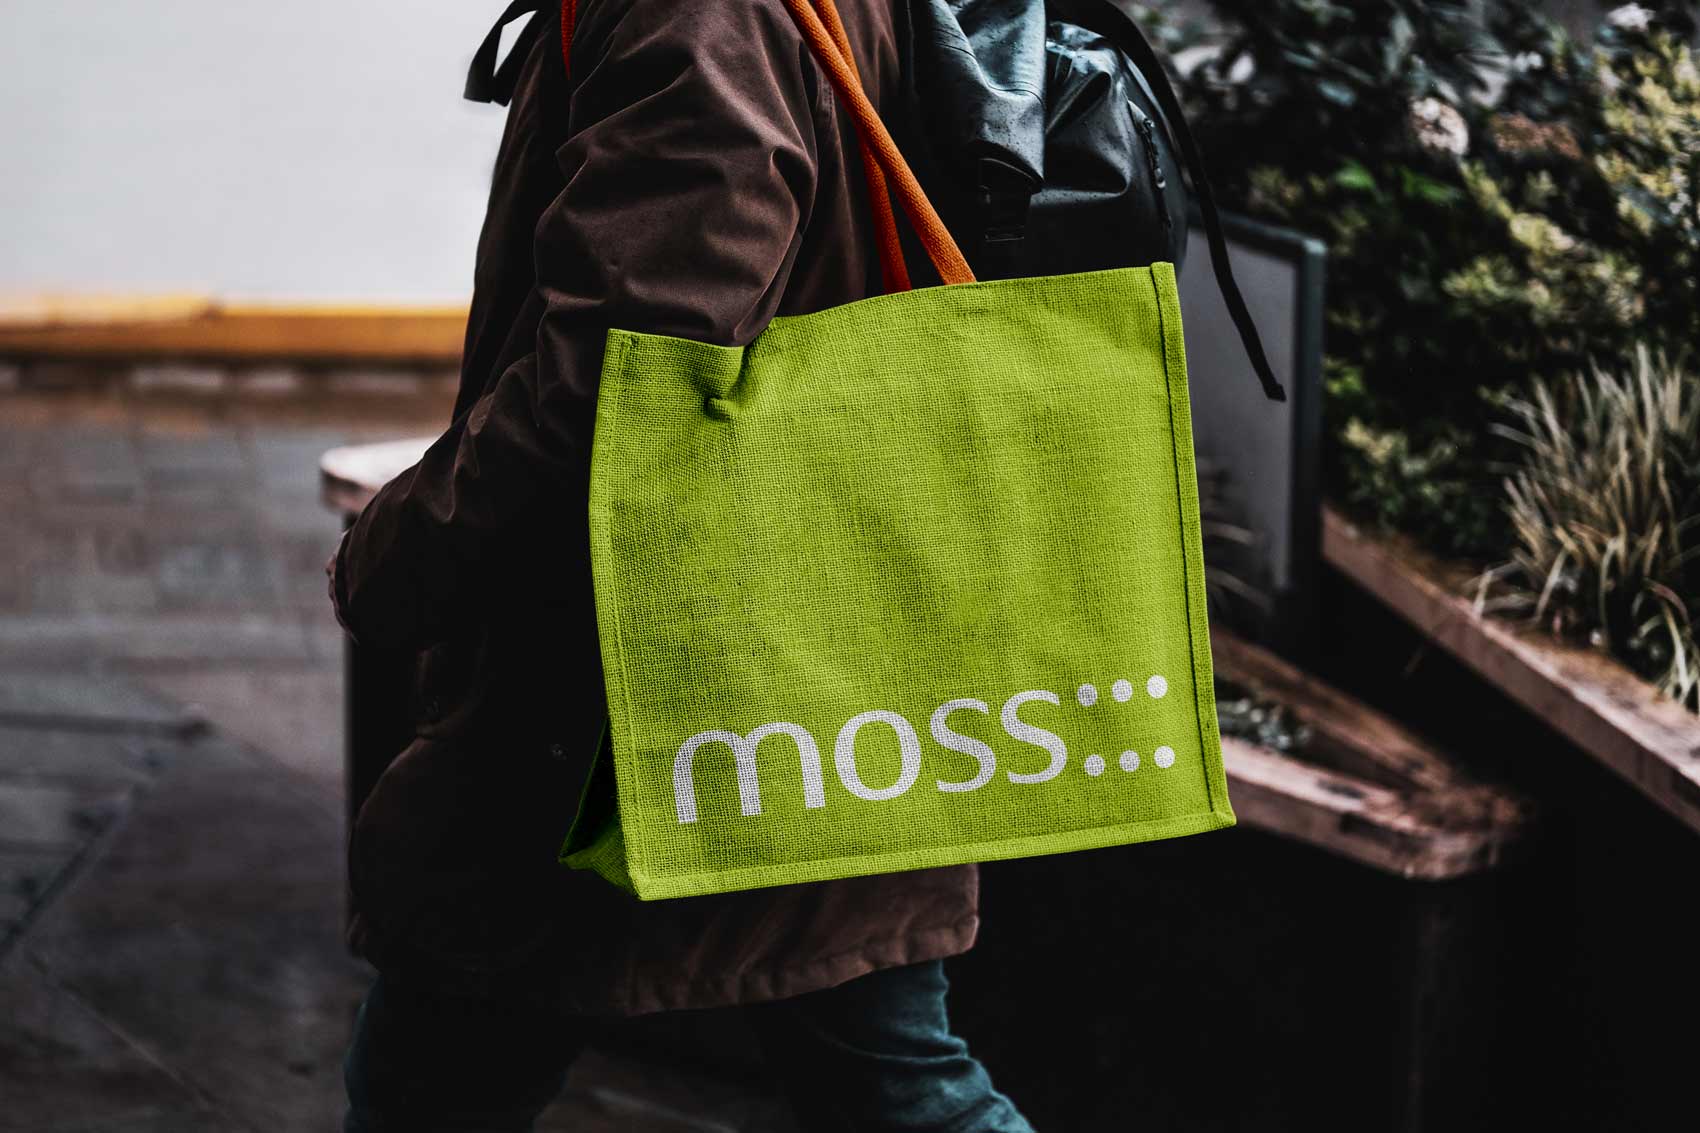 Logo for an architecture company on a lime green tote bag.